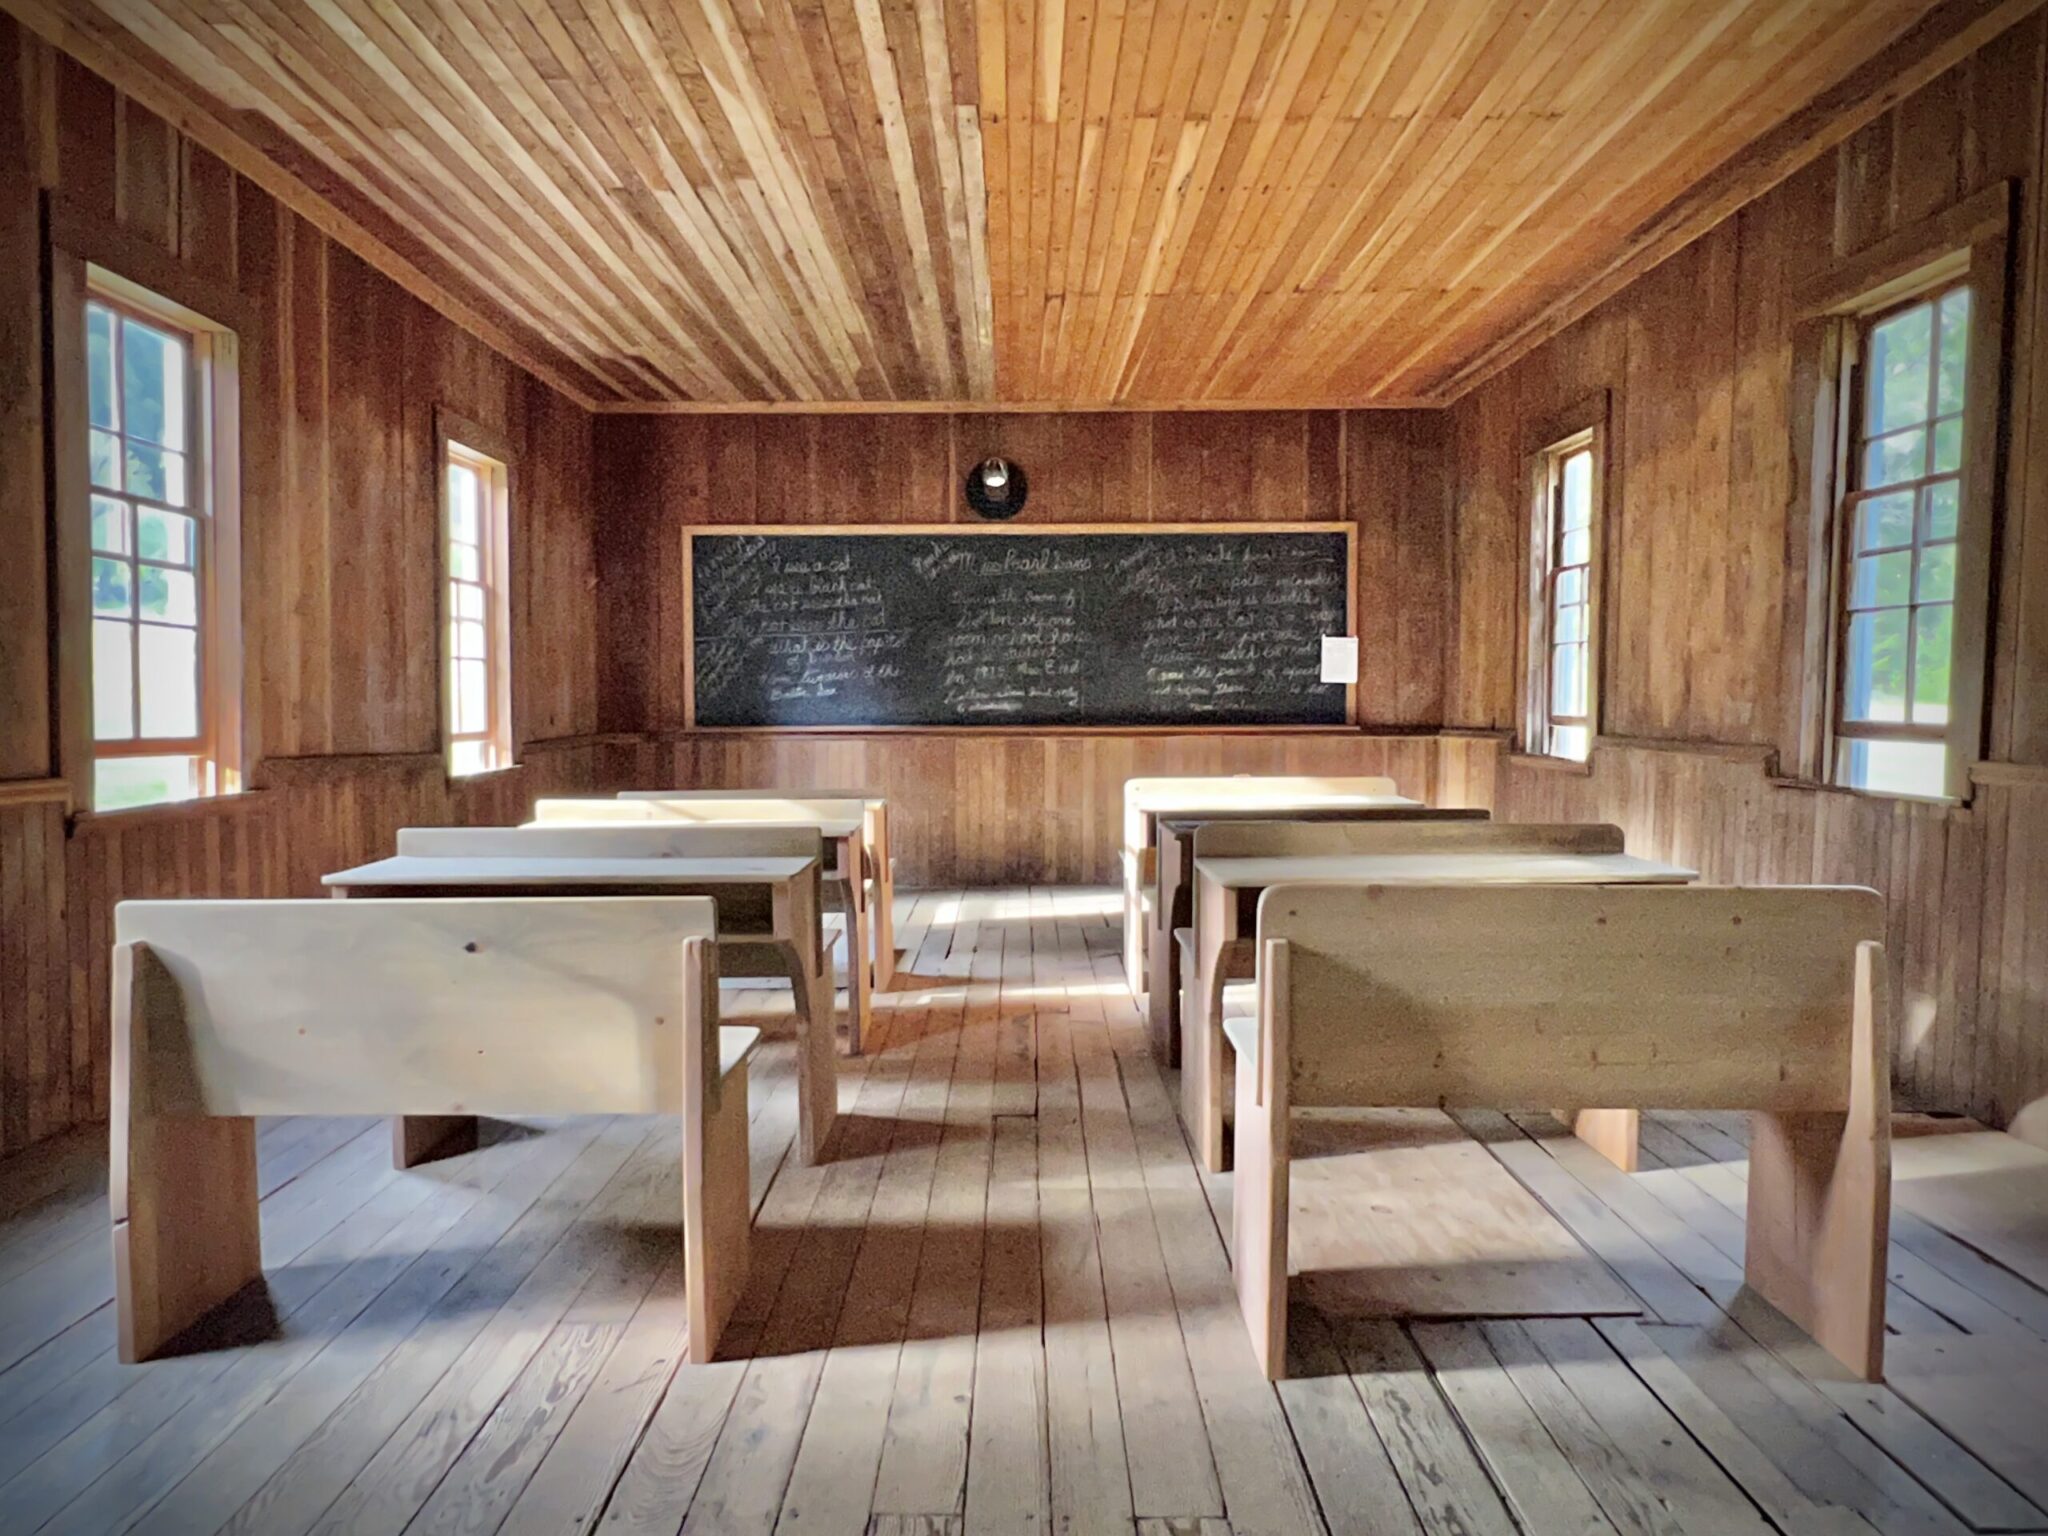 View from the back of the classroom, looking towards the chalkboard, everything in the room besides the chalkboard and glass windows is entirely wooden. There are two rows of seats leading up to the board, they are benches with desks built into the back of them, and there is illegible writing all over the chalkboard.